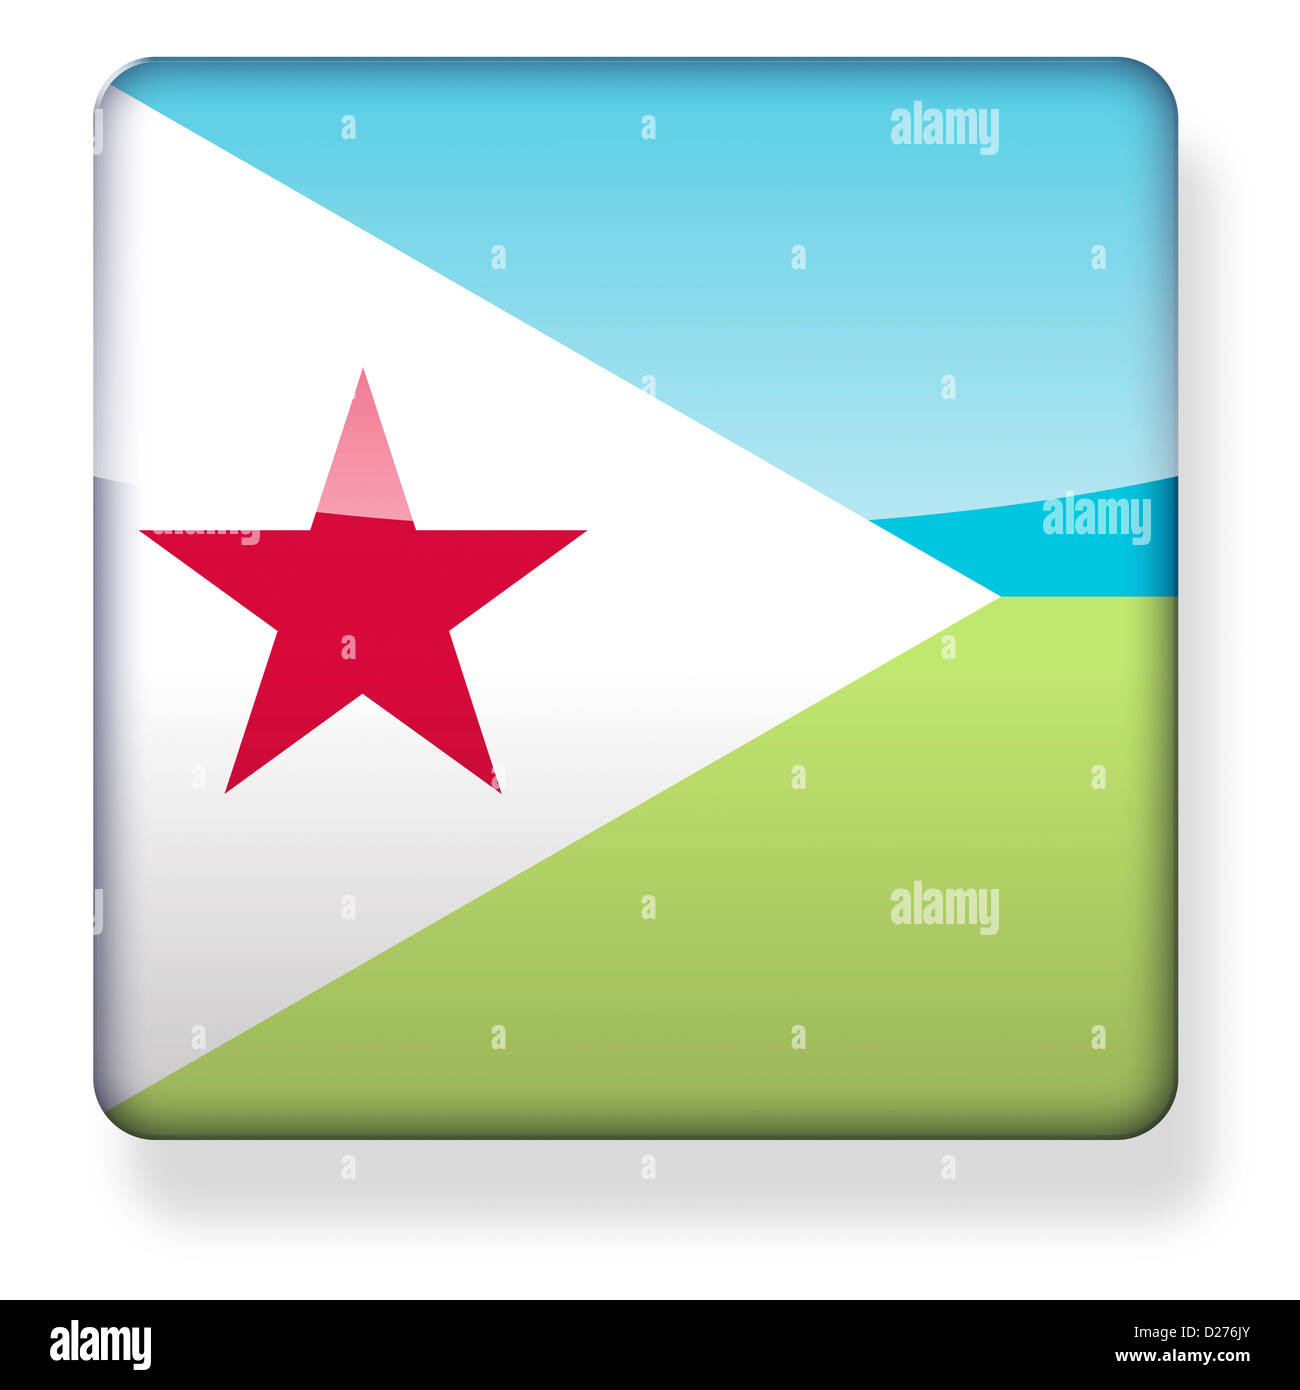 Djibouti flag as an app icon. Clipping path included. Stock Photo